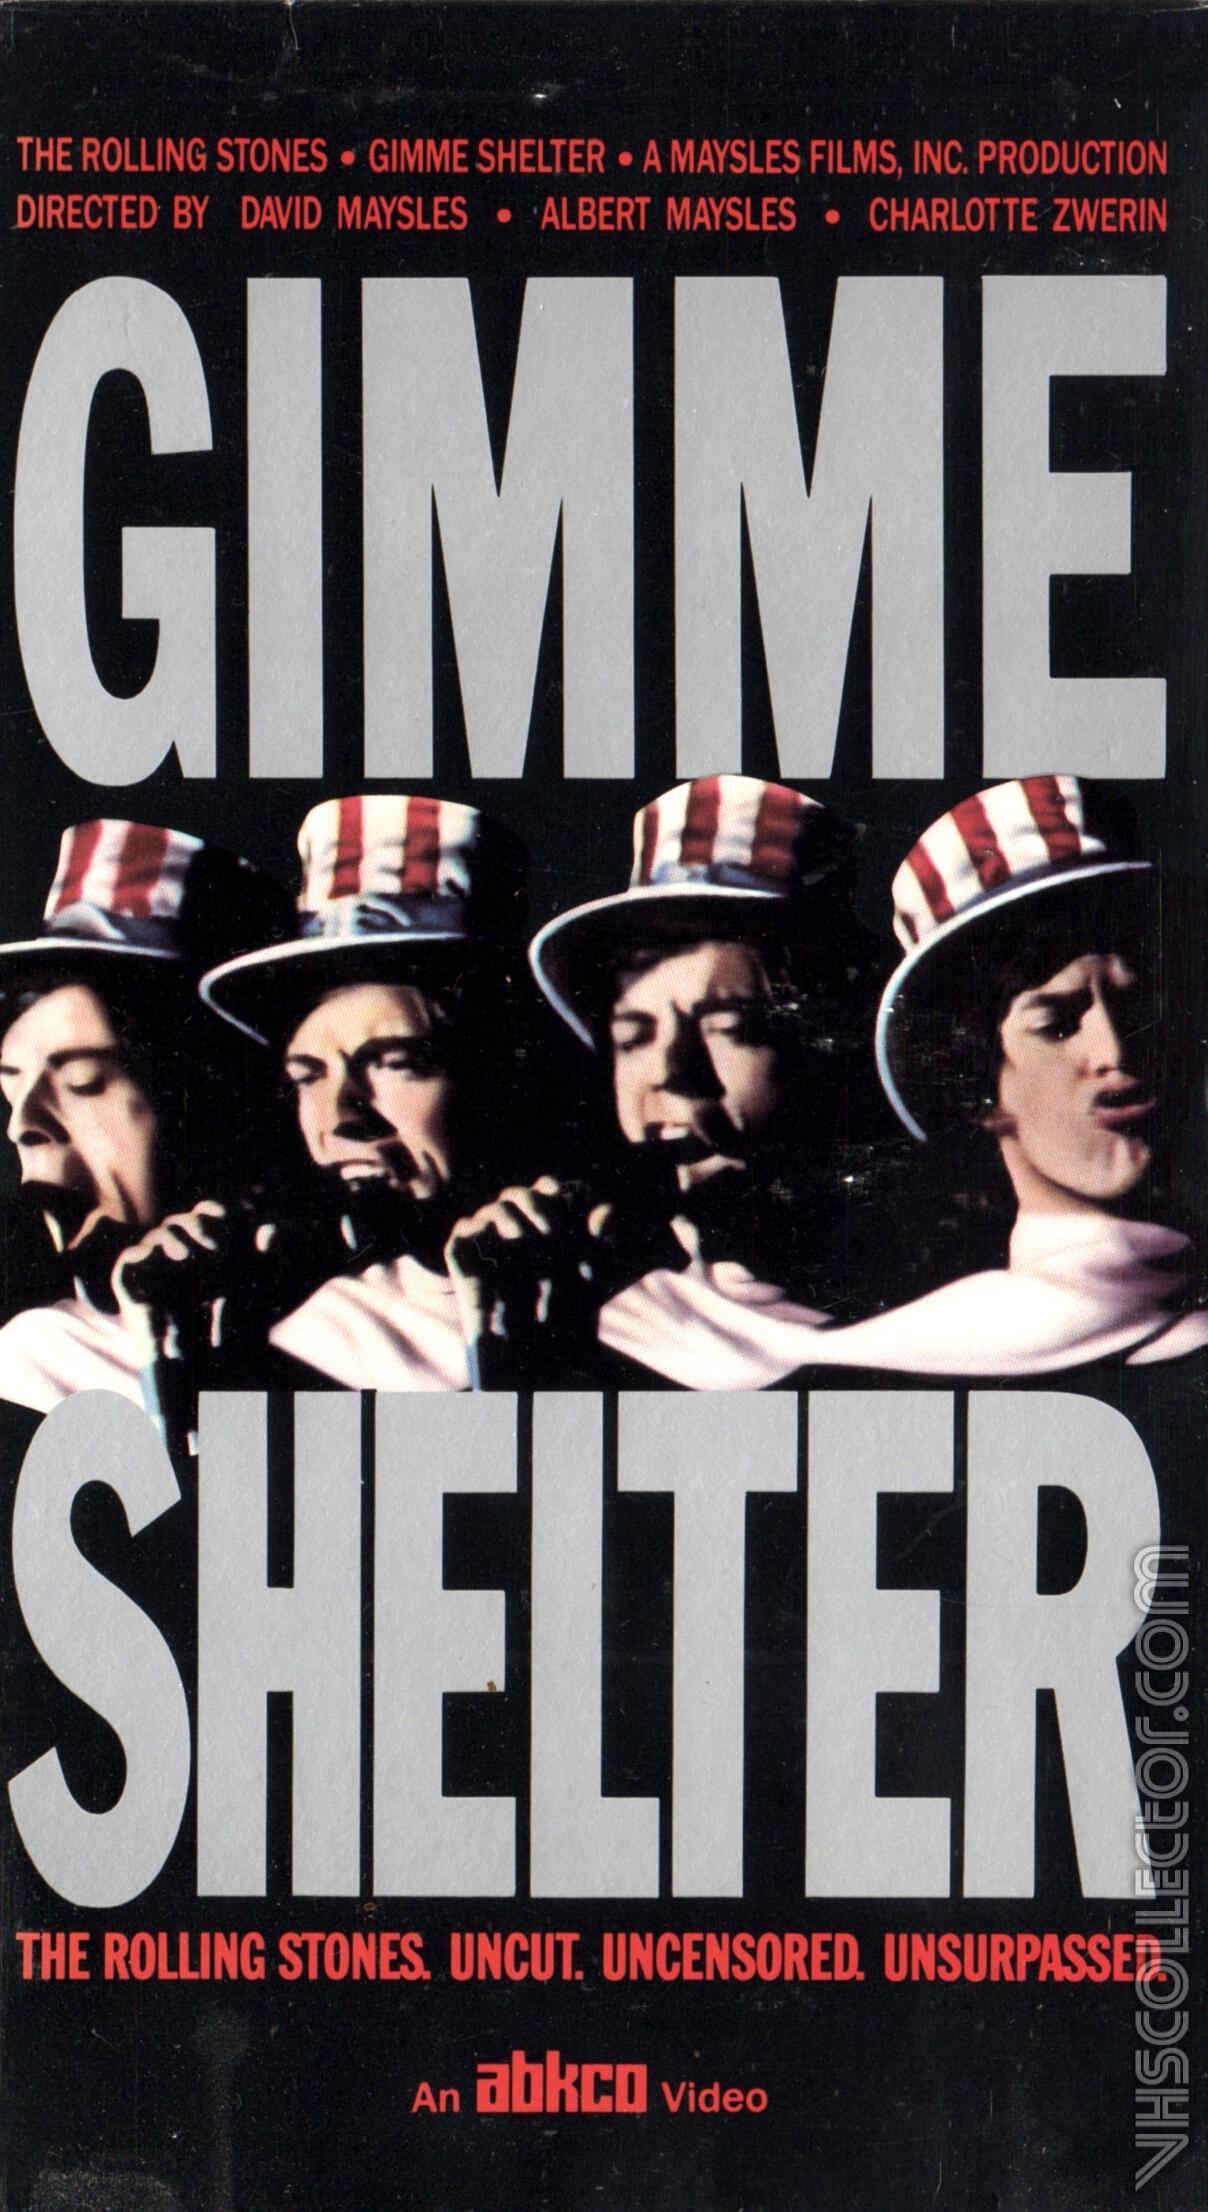 Stones gimme shelter. Rolling Stones - Gimme Shelter VHS. The Rolling Stones Gimme Shelter обложка. Gimme Shelter mono the Rolling Stones.